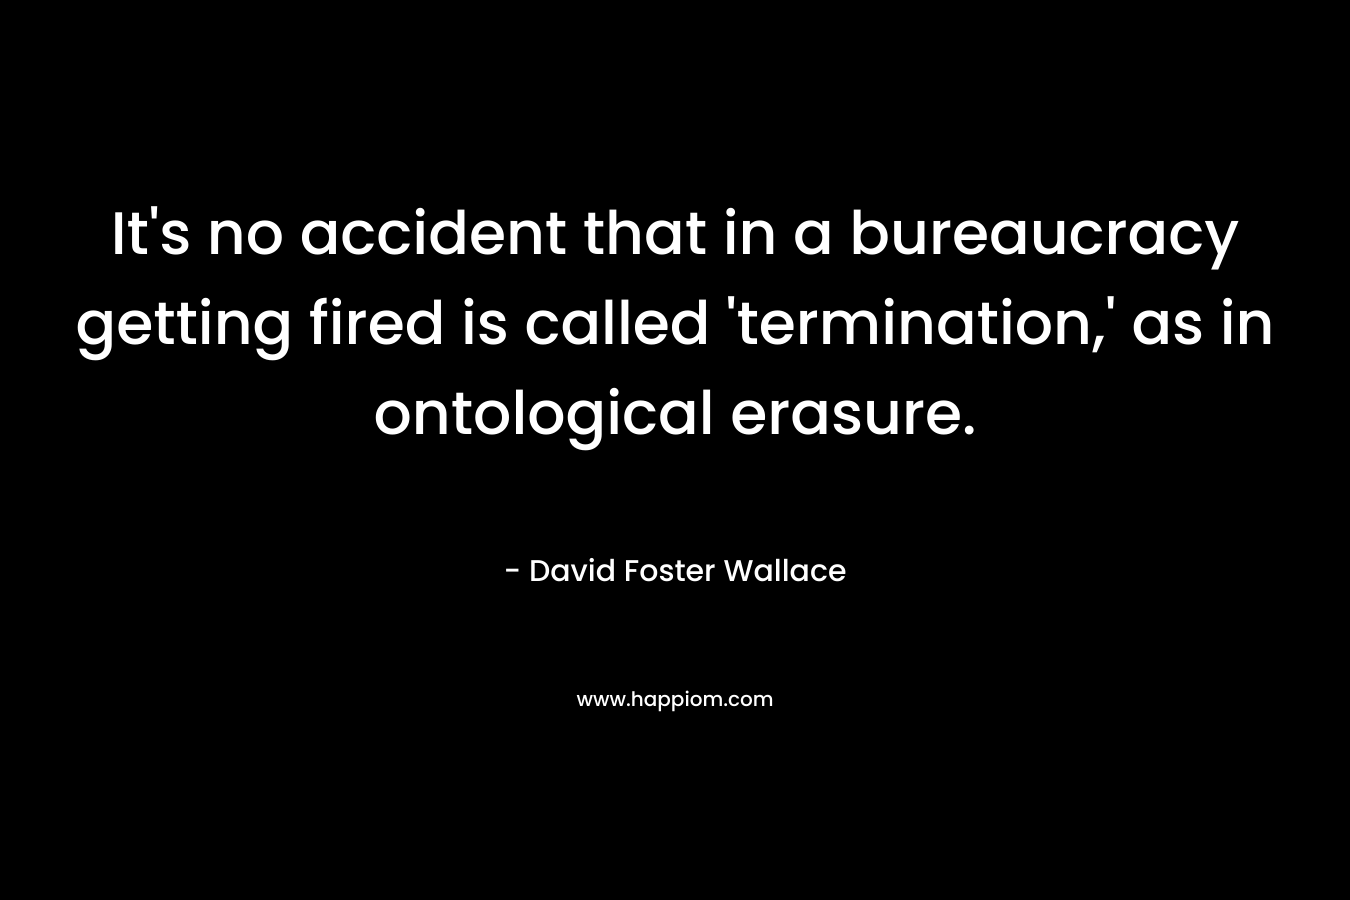 It's no accident that in a bureaucracy getting fired is called 'termination,' as in ontological erasure.